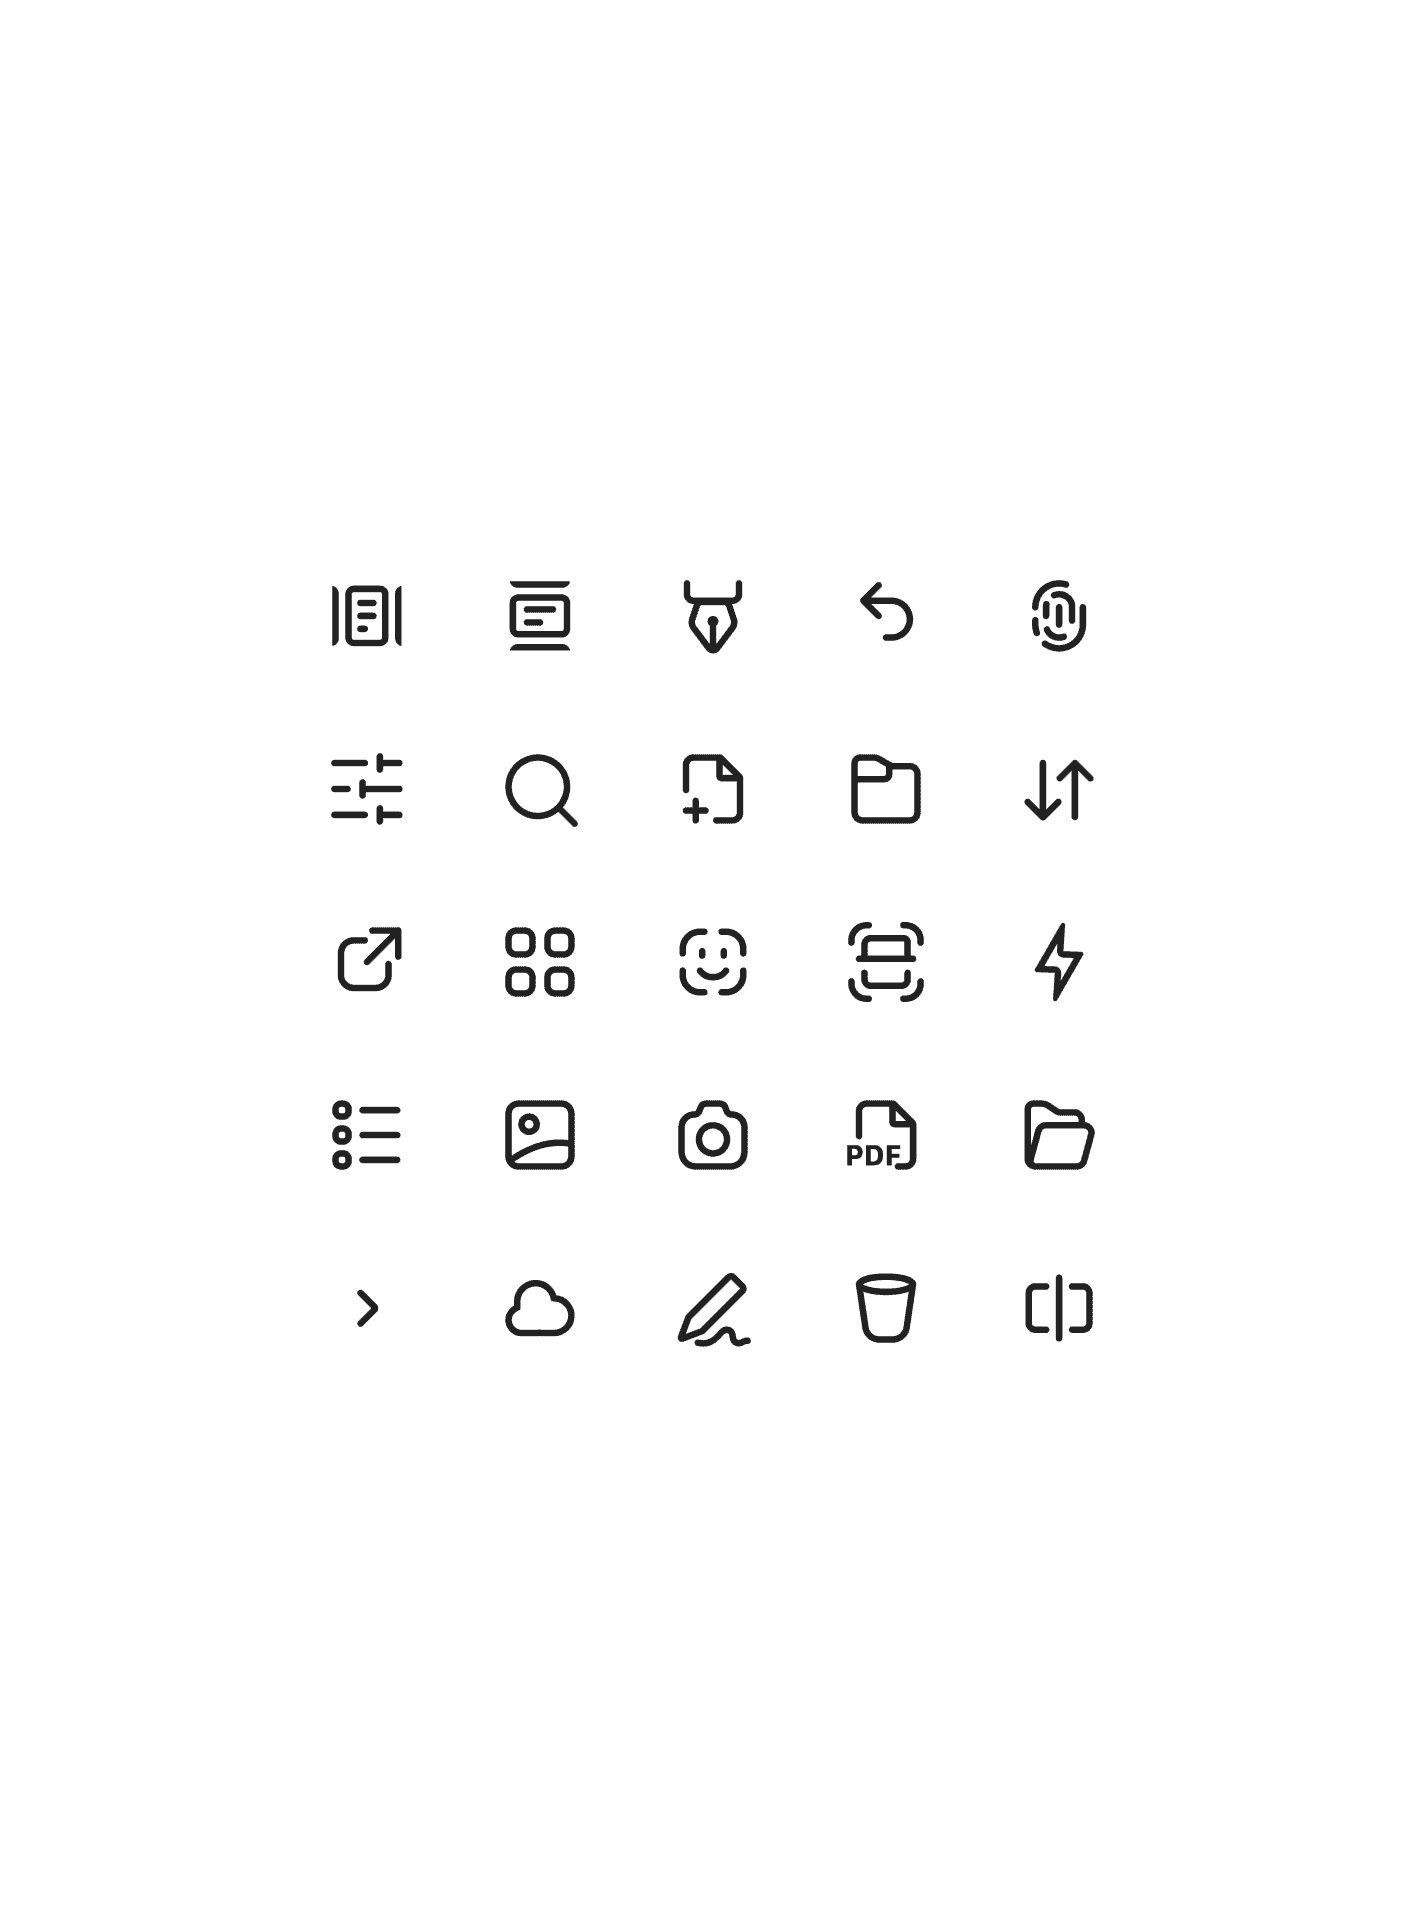 Some icons used in Signer app